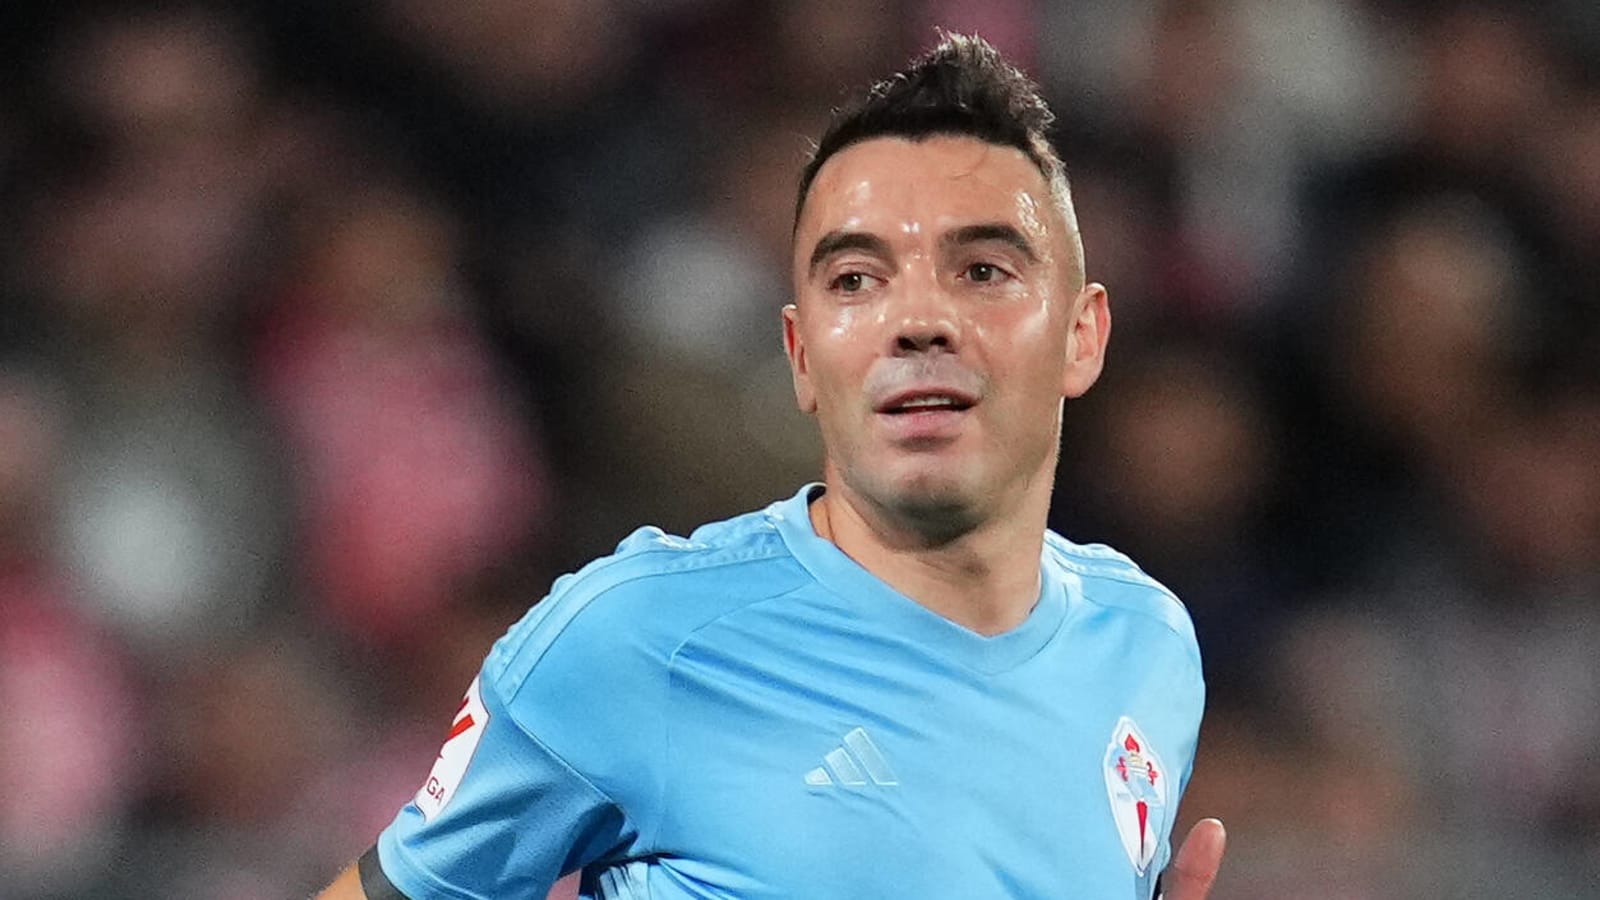 Watch: Former Liverpool striker Iago Aspas destroys VAR monitor in a moment of madness – issues apology later